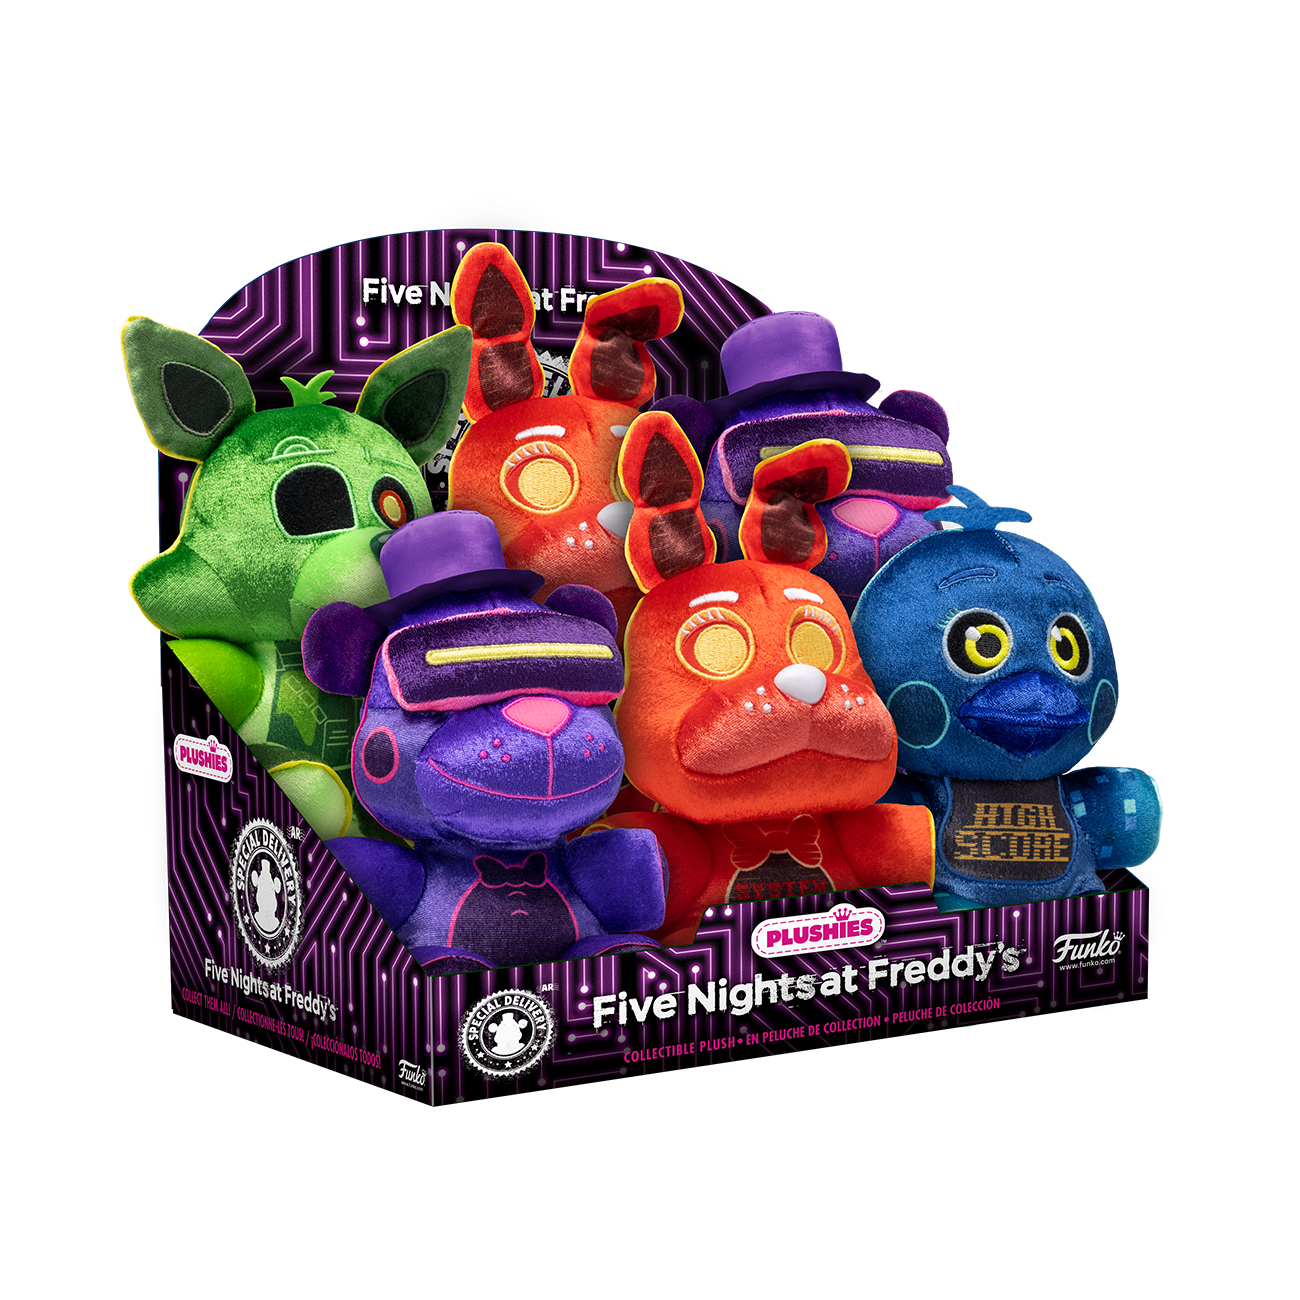 https://media.gamestop.com/i/gamestop/11156070_ALT04/Funko-Five-Nights-at-Freddys-Collectible-Neon-Plush--Styles-May-Vary?$pdp$